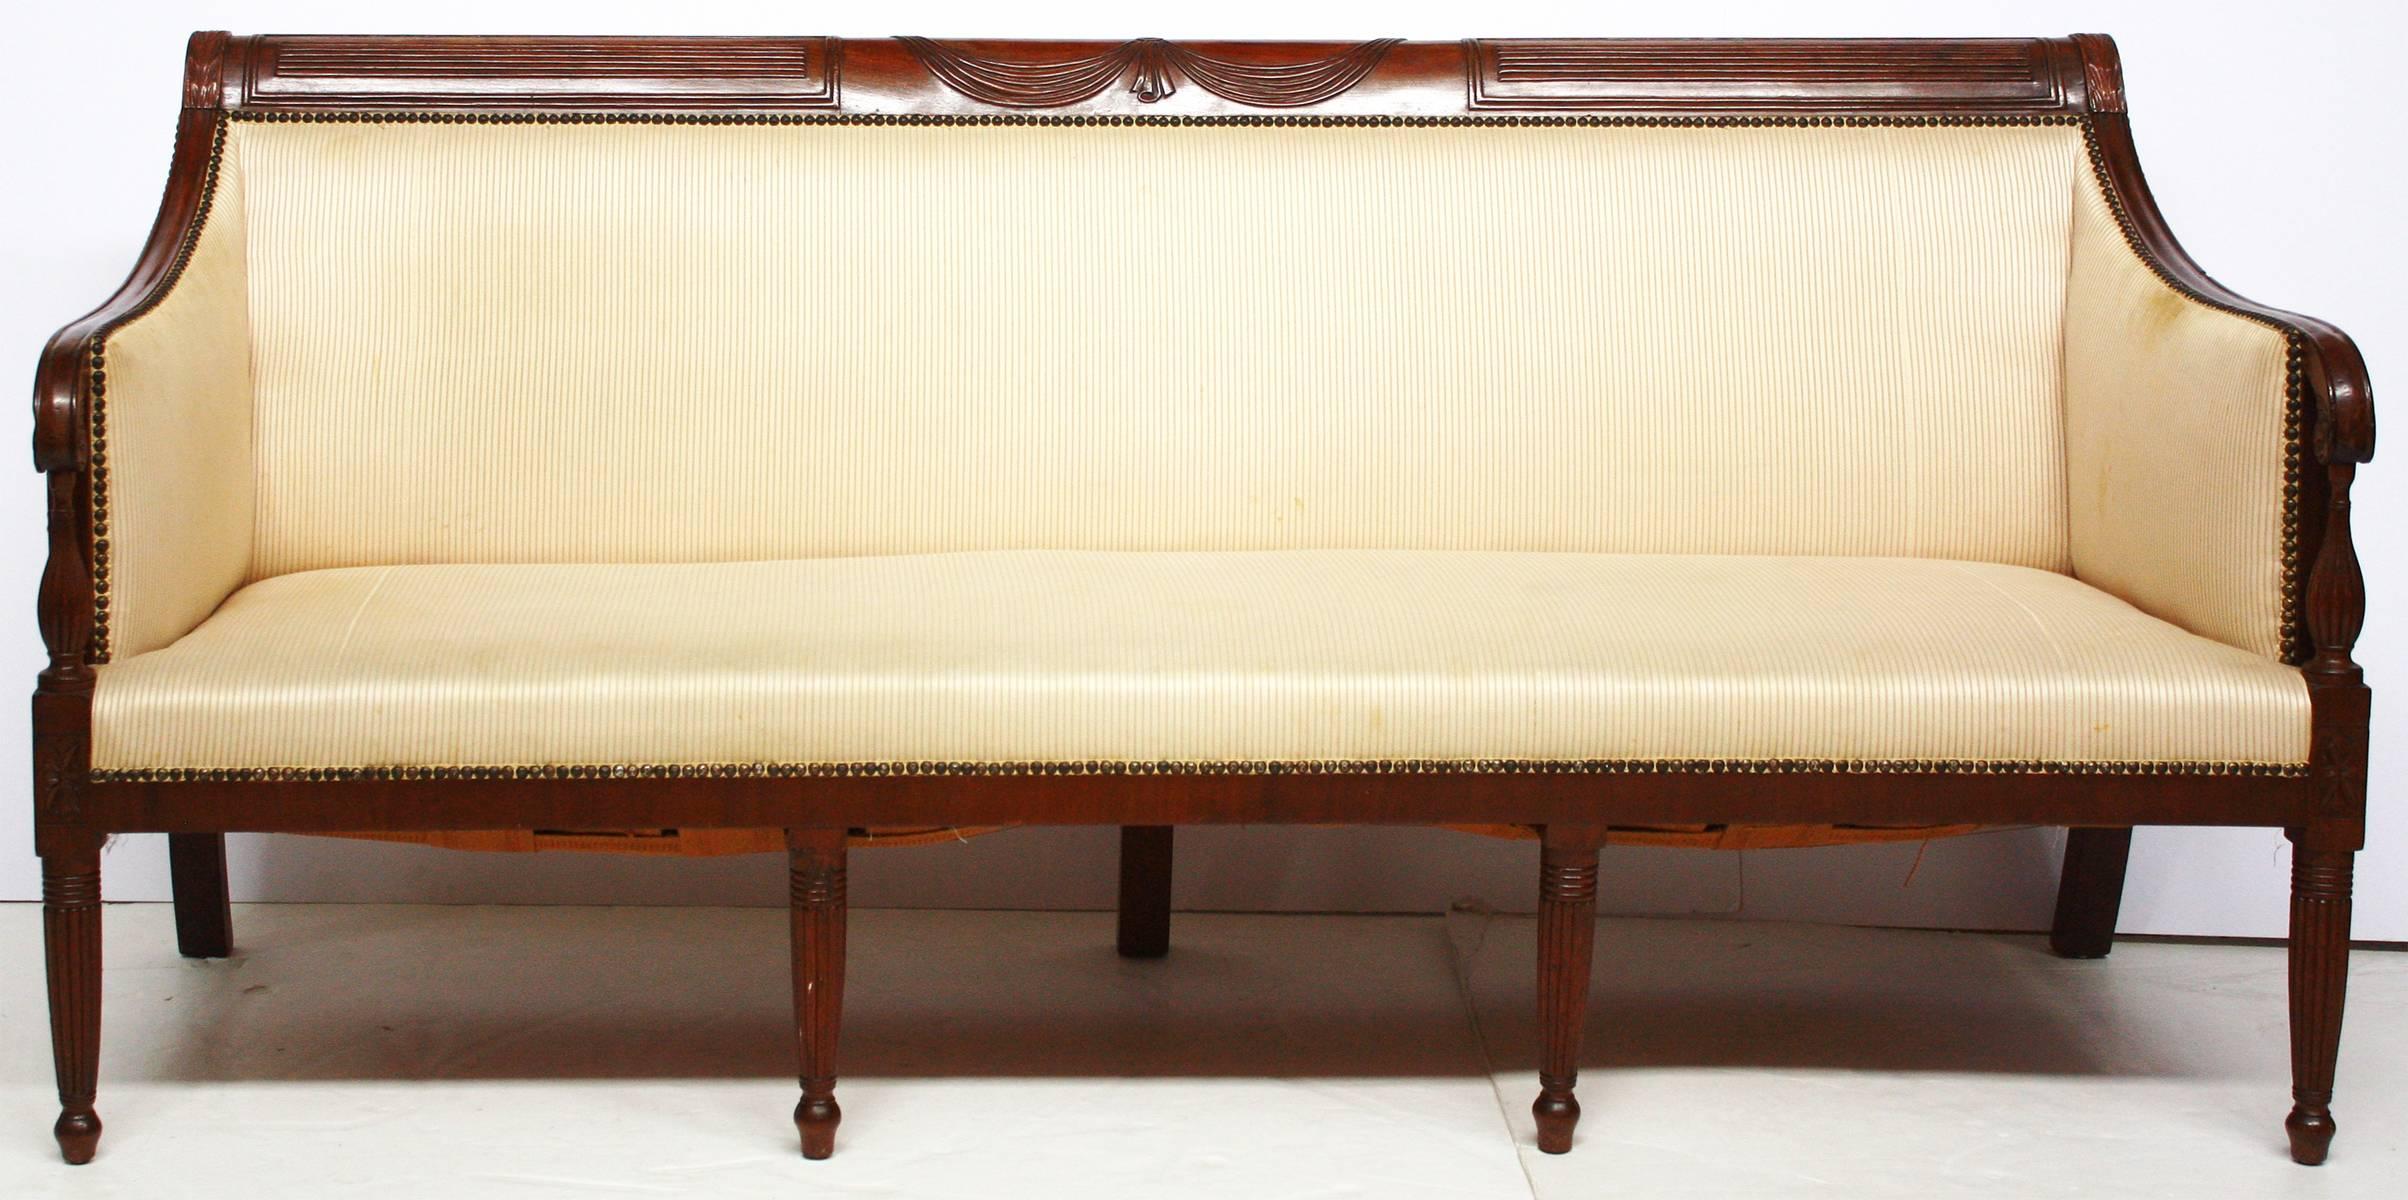 An American Federal carved seven legged mahogany sofa. Three panels of crest rail carvings: A central swag panel, with reeded panels to either side. Wheat sheaths on the corners. Curved arms with separate reeded support and legs. Upholstered in thin